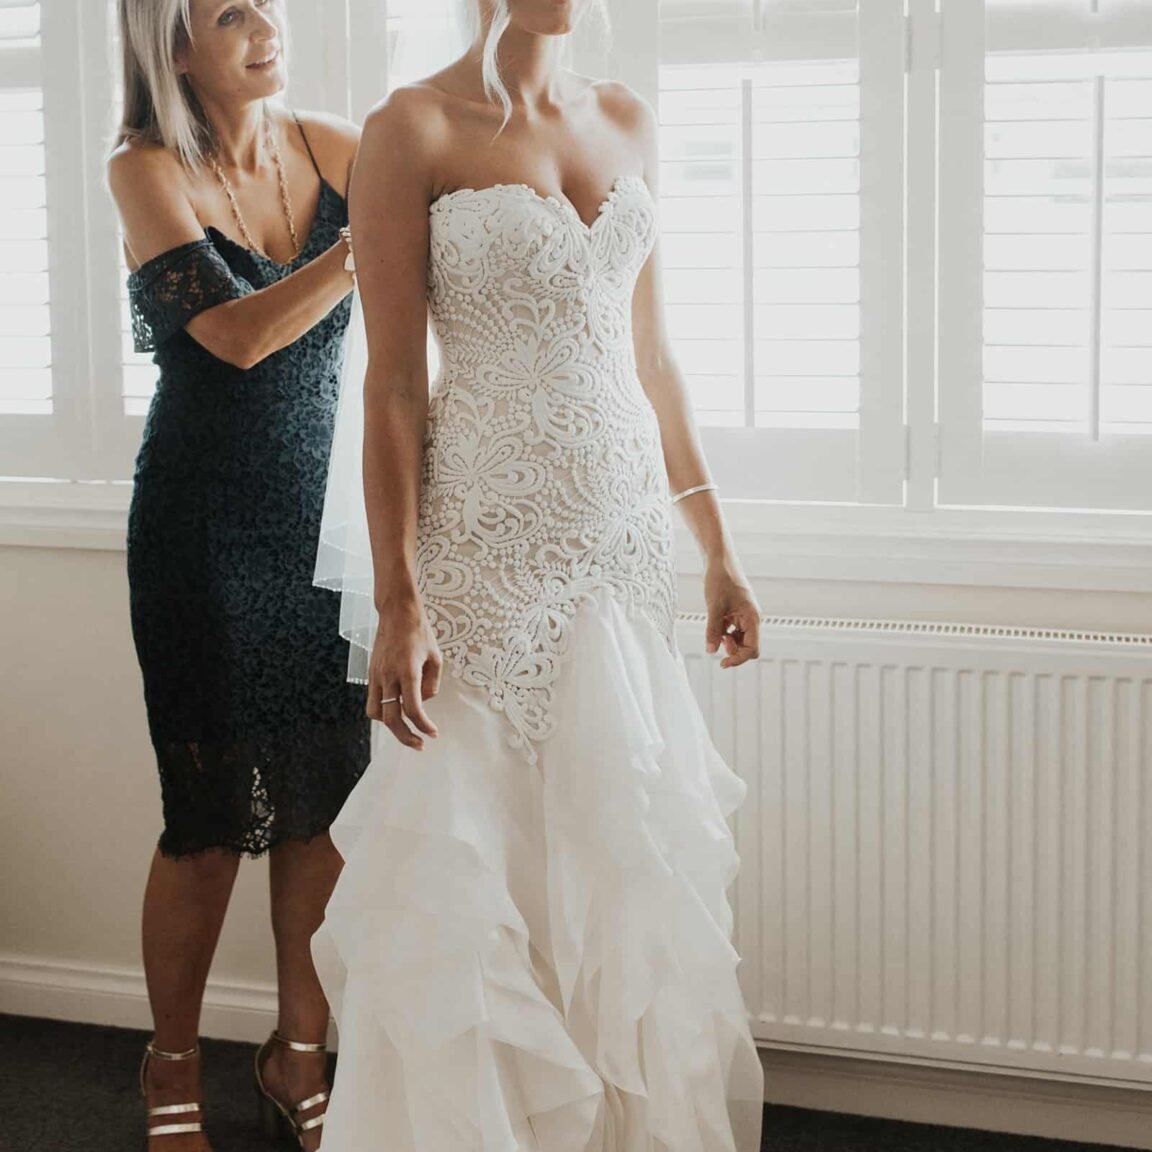 Flattering Wedding Dress Styles For Your Body Type — Bernadette Pimenta  Couture